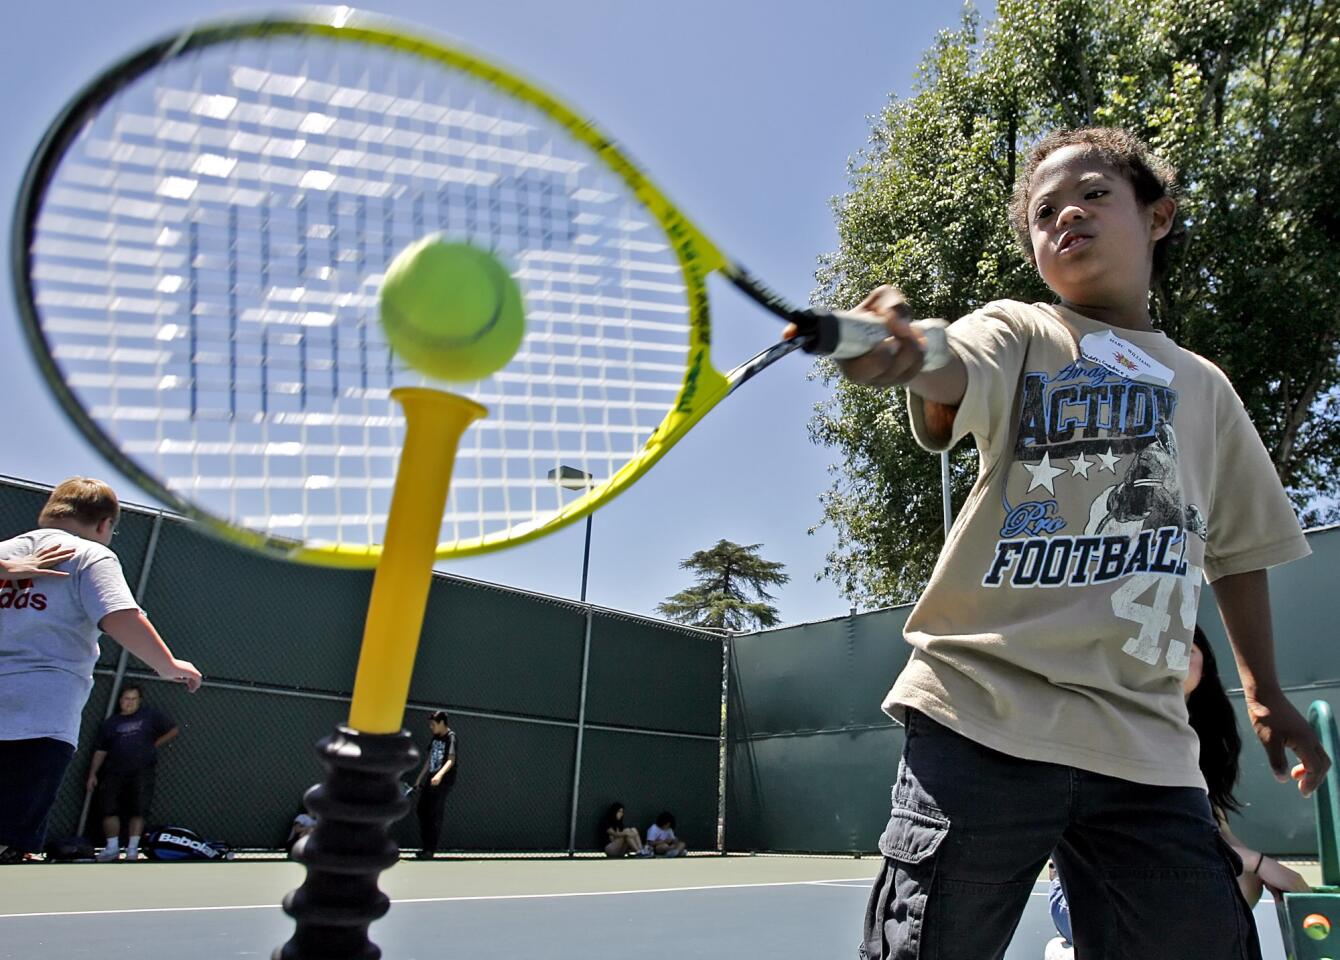 Eight-year old Marc Williams swings at a tennis ball during the annual Jensen-Schmidt Tennis Academy for Special Needs individuals at the Burbank Tennis Center in Burbank on Tuesday, June 26, 2012.